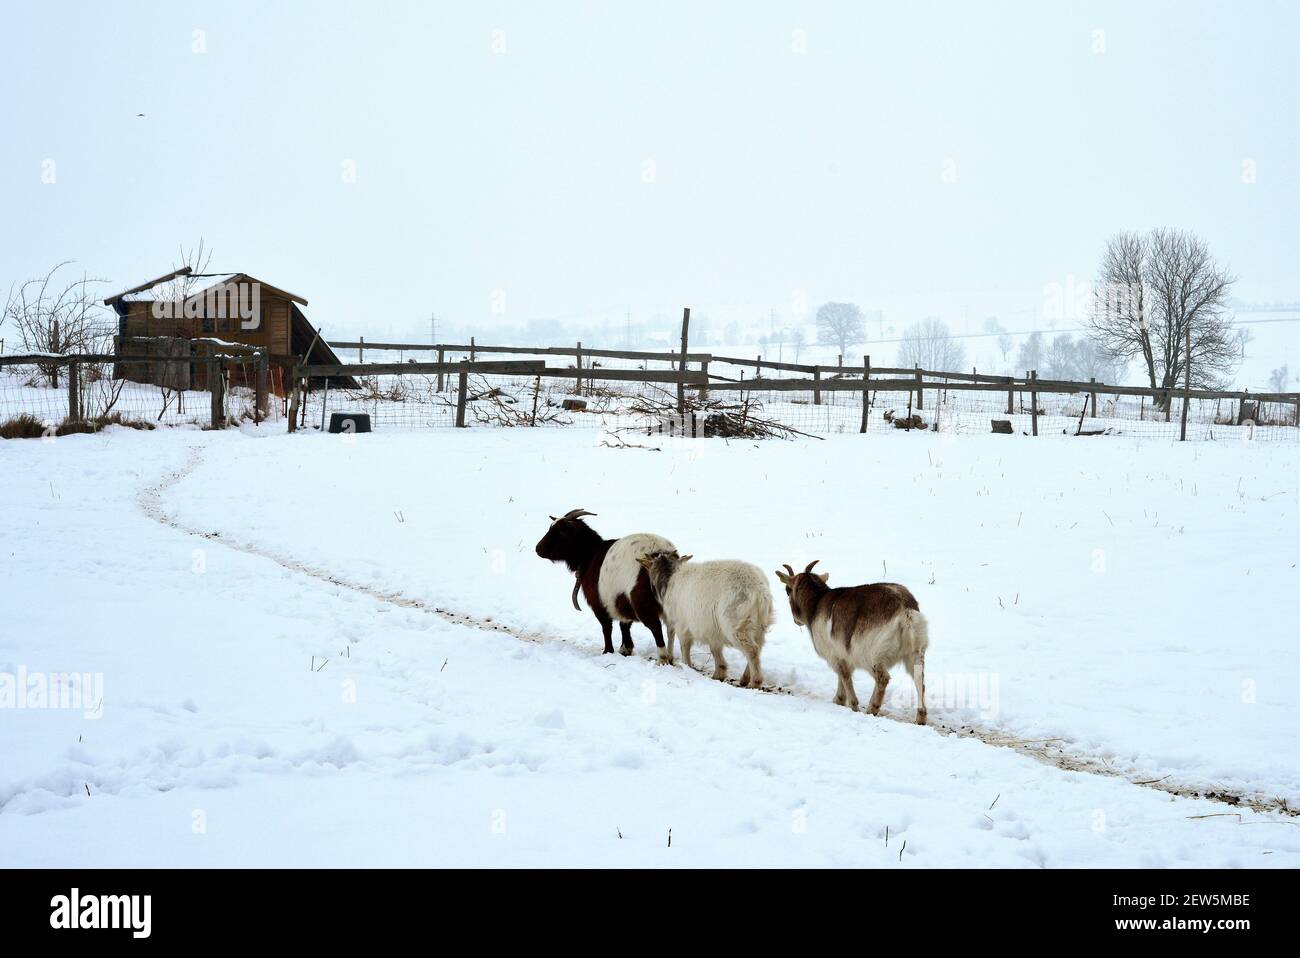 Goats on their way to the stable in winter through snow Stock Photo